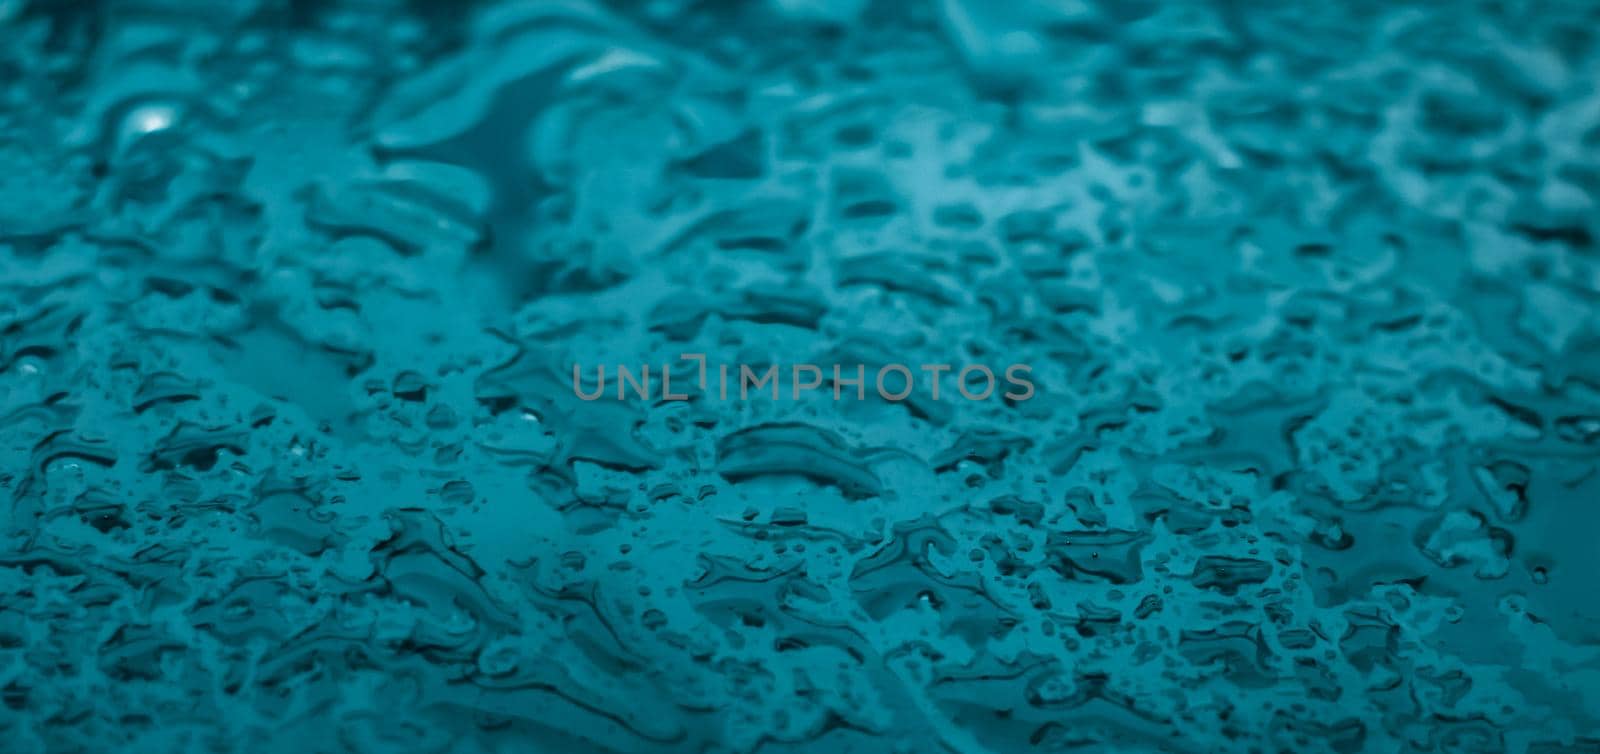 Water texture abstract background, aqua drops on turquoise glass as science macro element, rainy weather and nature surface art backdrop for environmental brand design by Anneleven